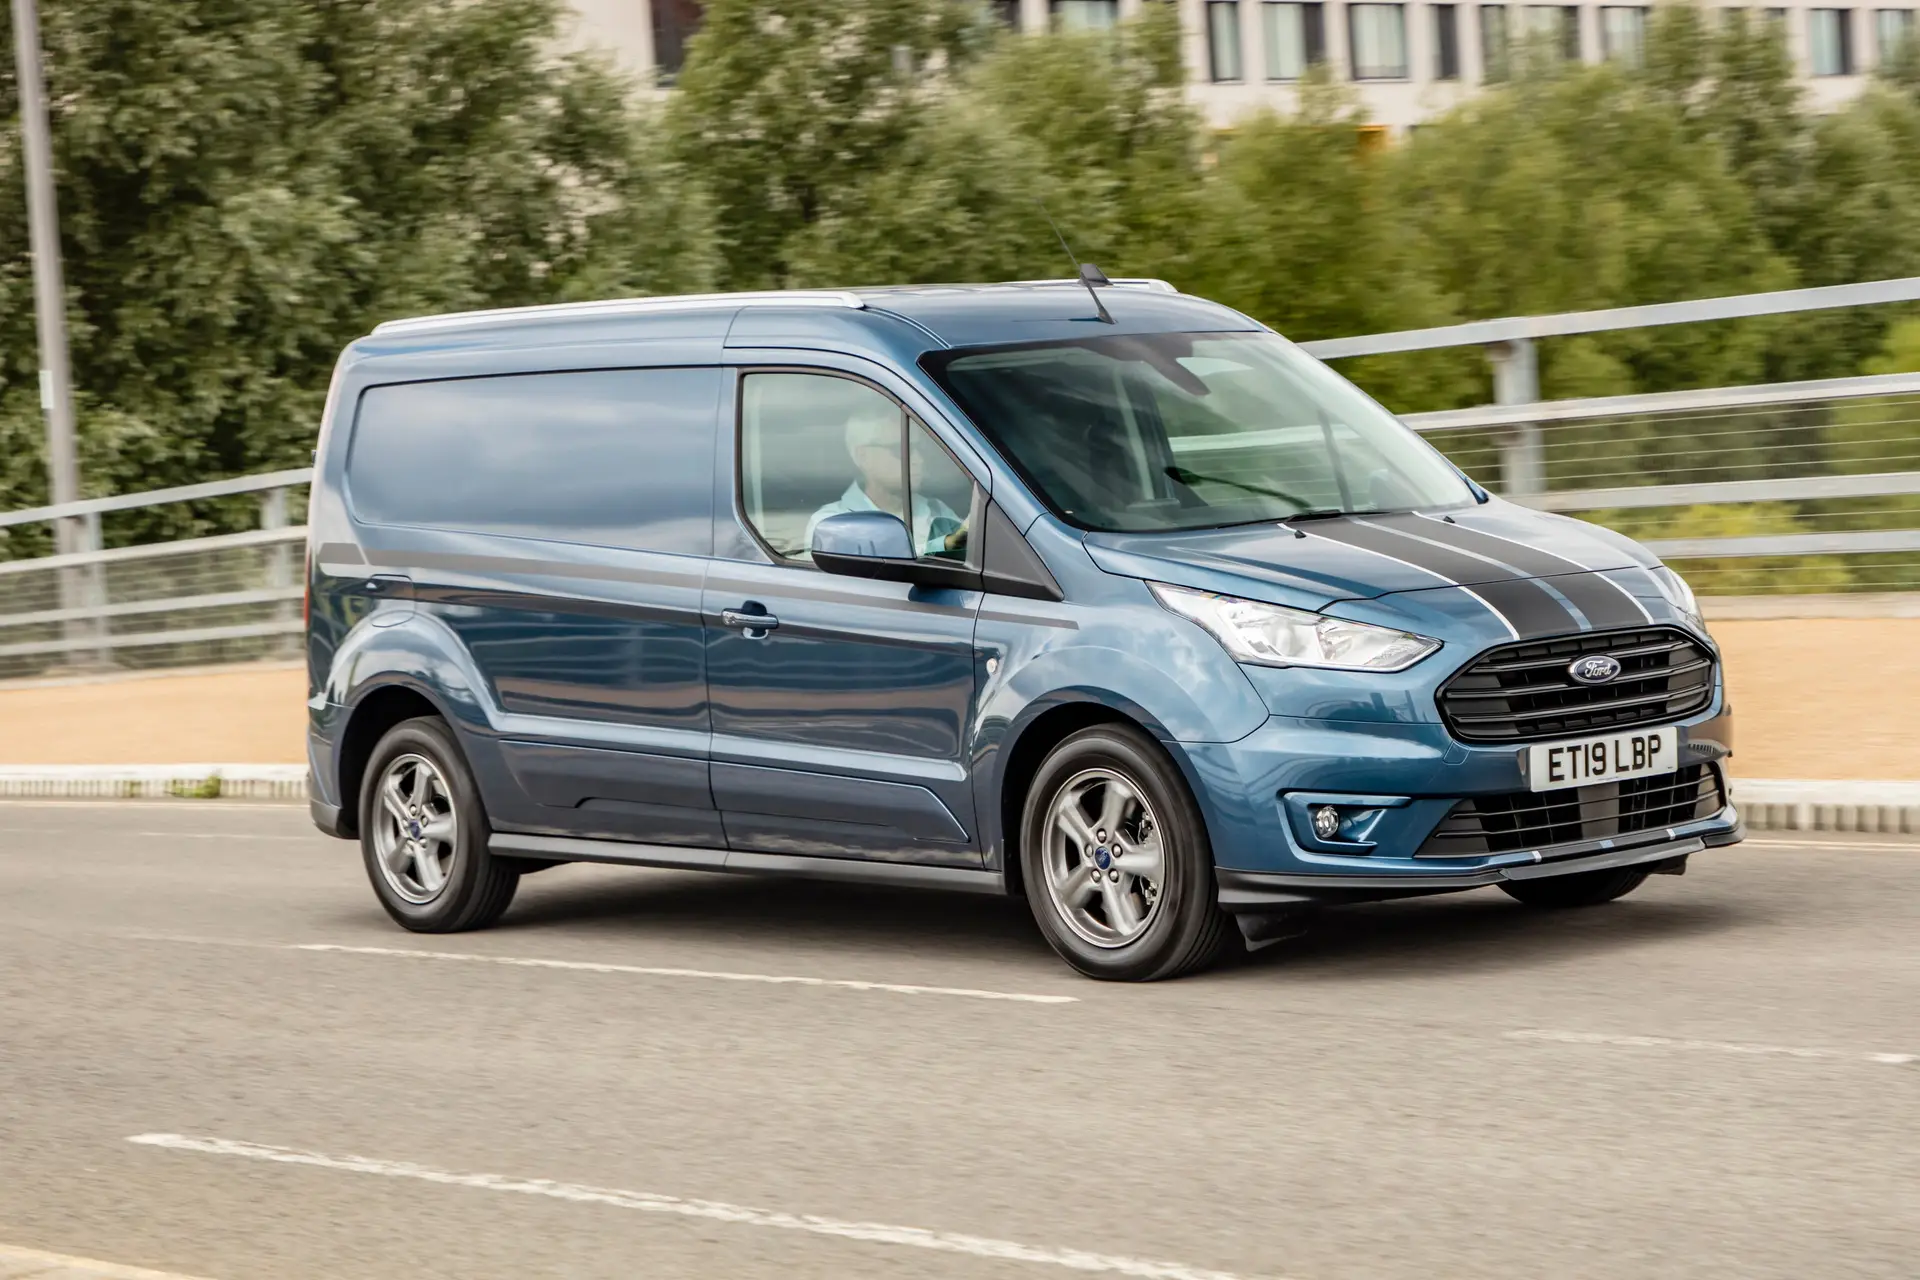 Ford Transit Connect (2013-2020) Review: exterior front three quarter photo of the Ford Transit Connect on the road